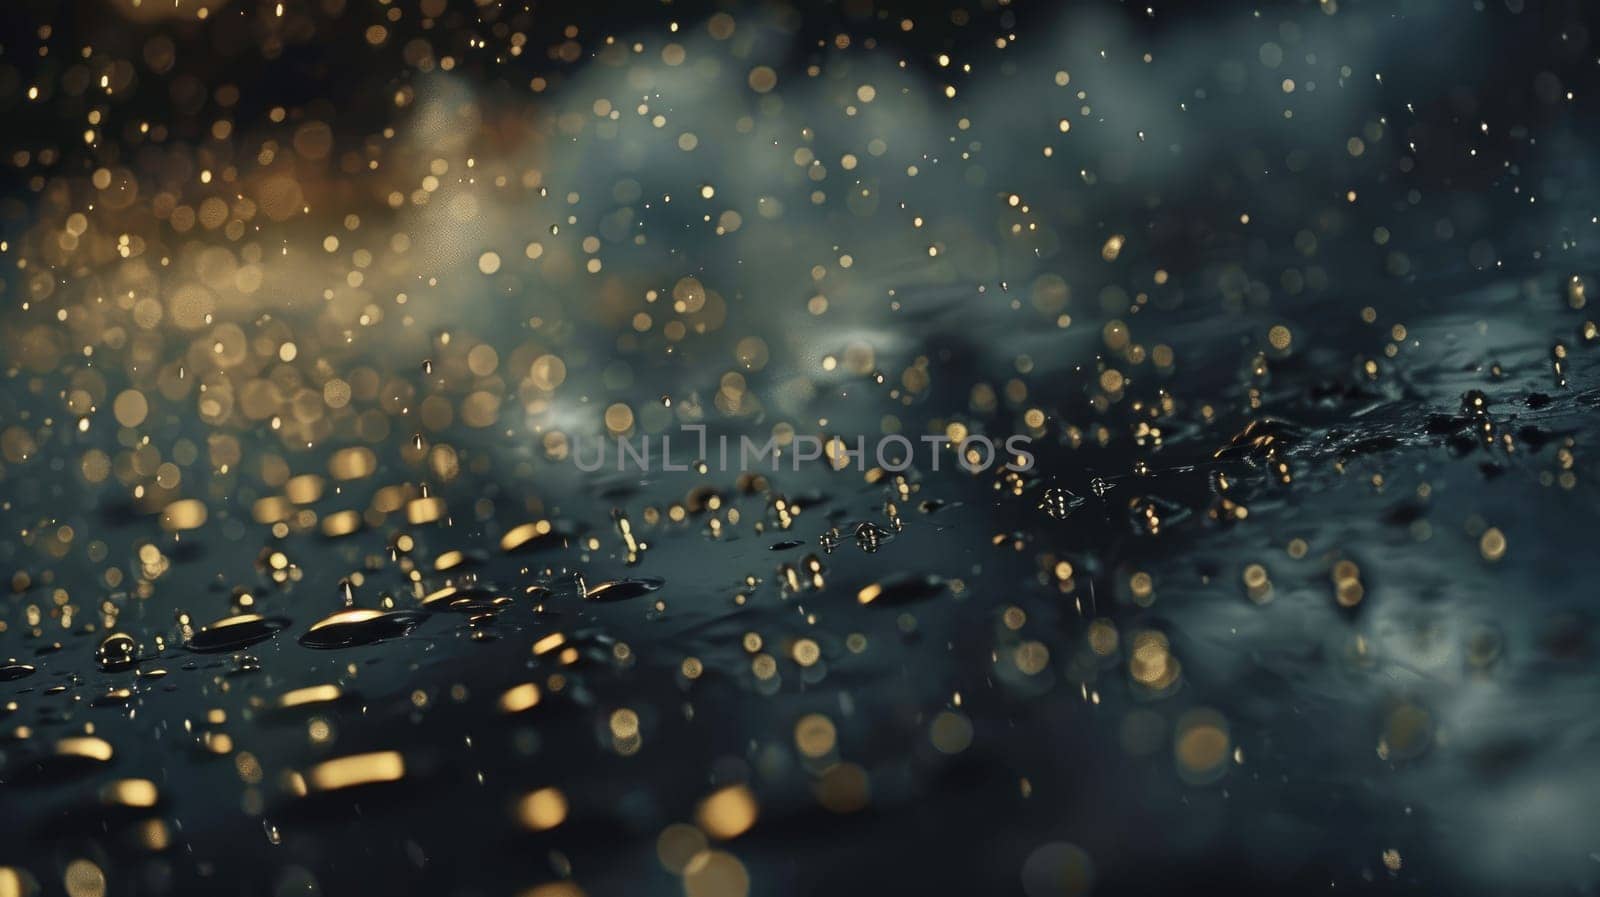 The image is of a wet surface with a lot of water droplets and a few specks of gold. Scene is calm and serene, as the water droplets seem to be falling gently